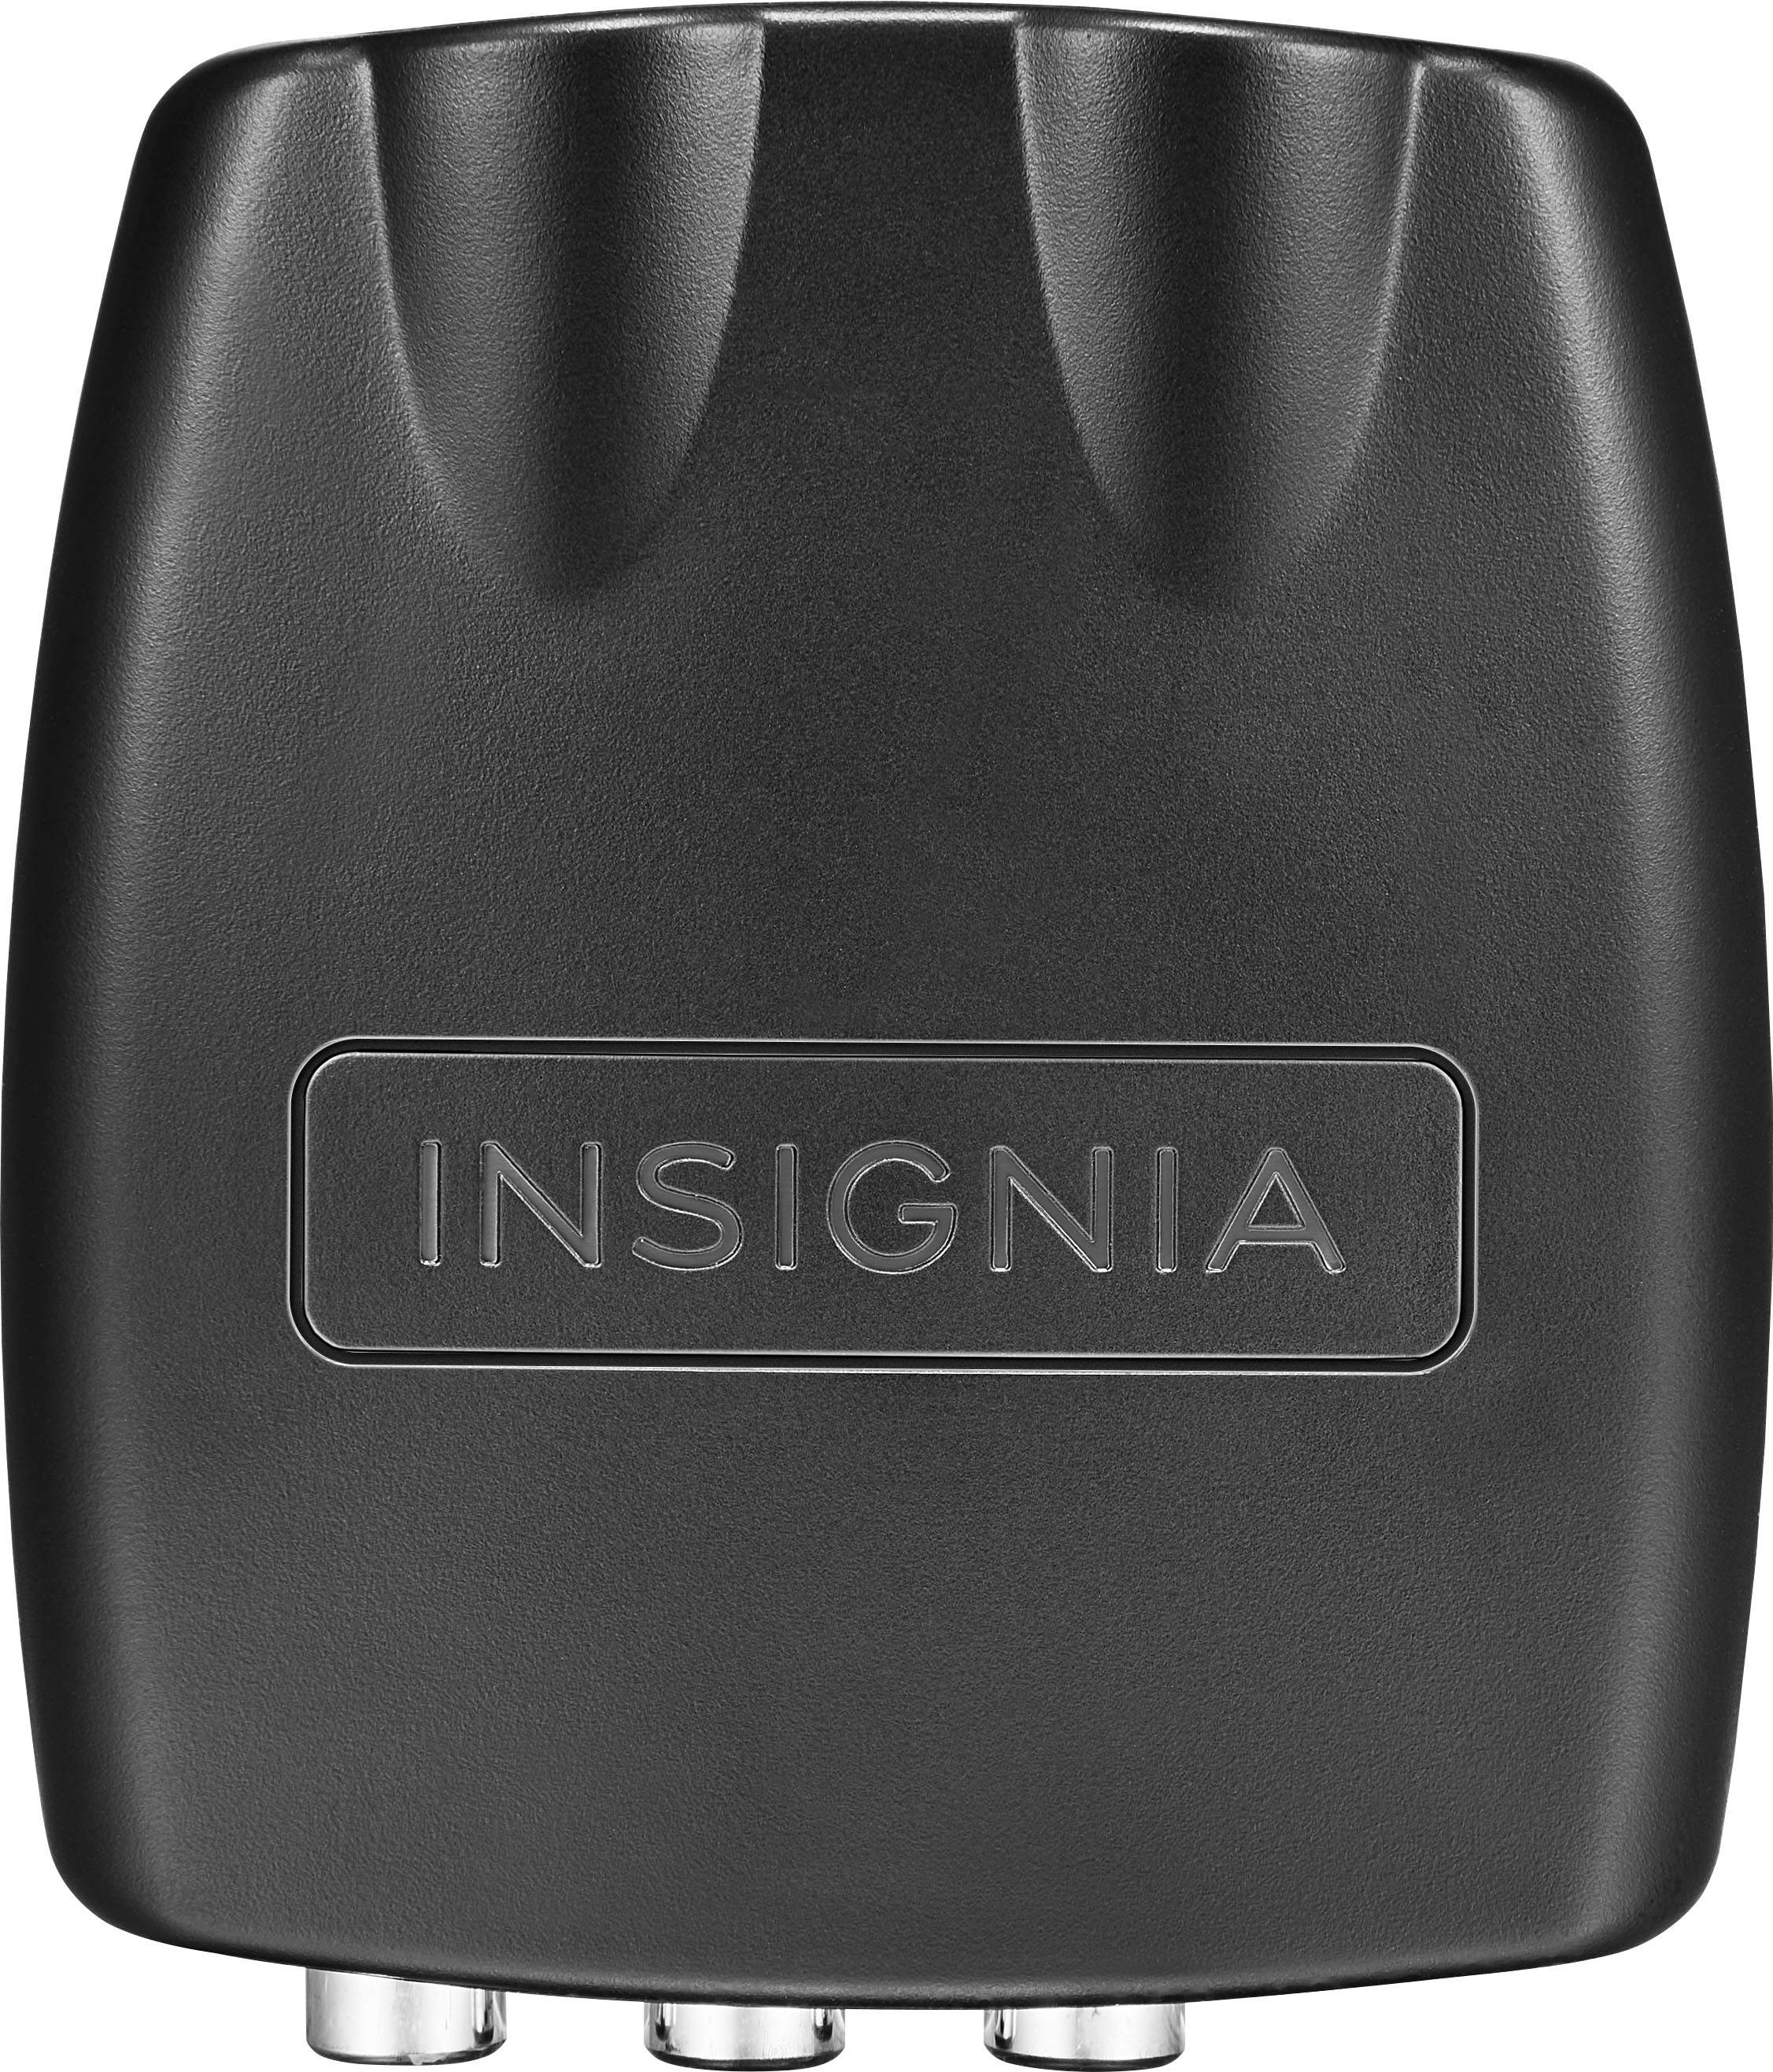 Insignia™ RCA to HDMI Converter Black NS-HZ330 - Best Buy